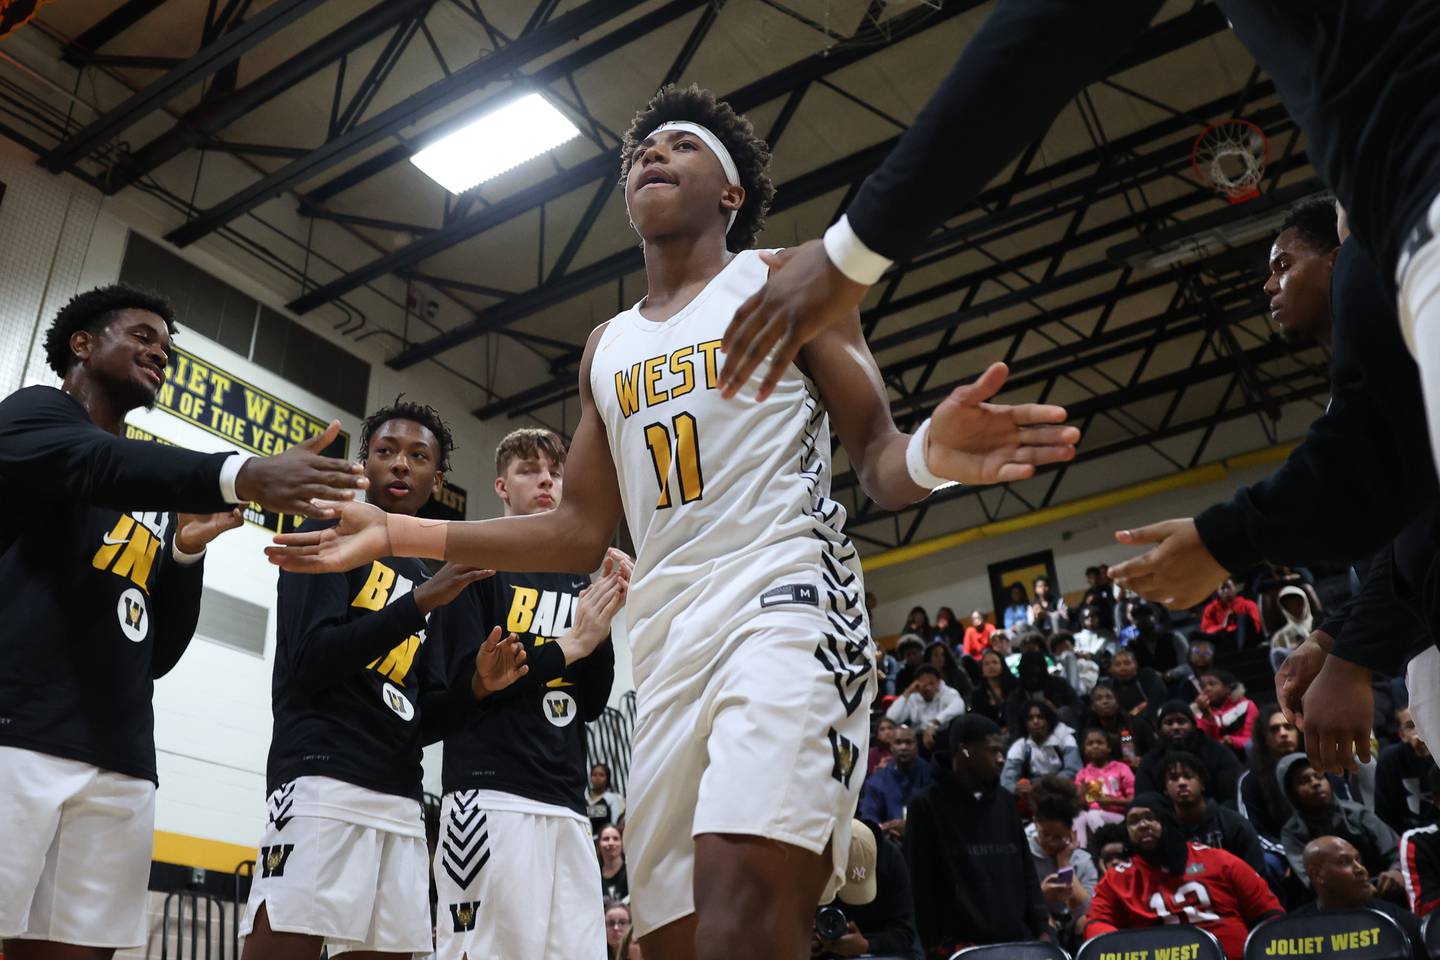 Joliet West’s Jeremy Fears is introduced before the start against Plainfield East.